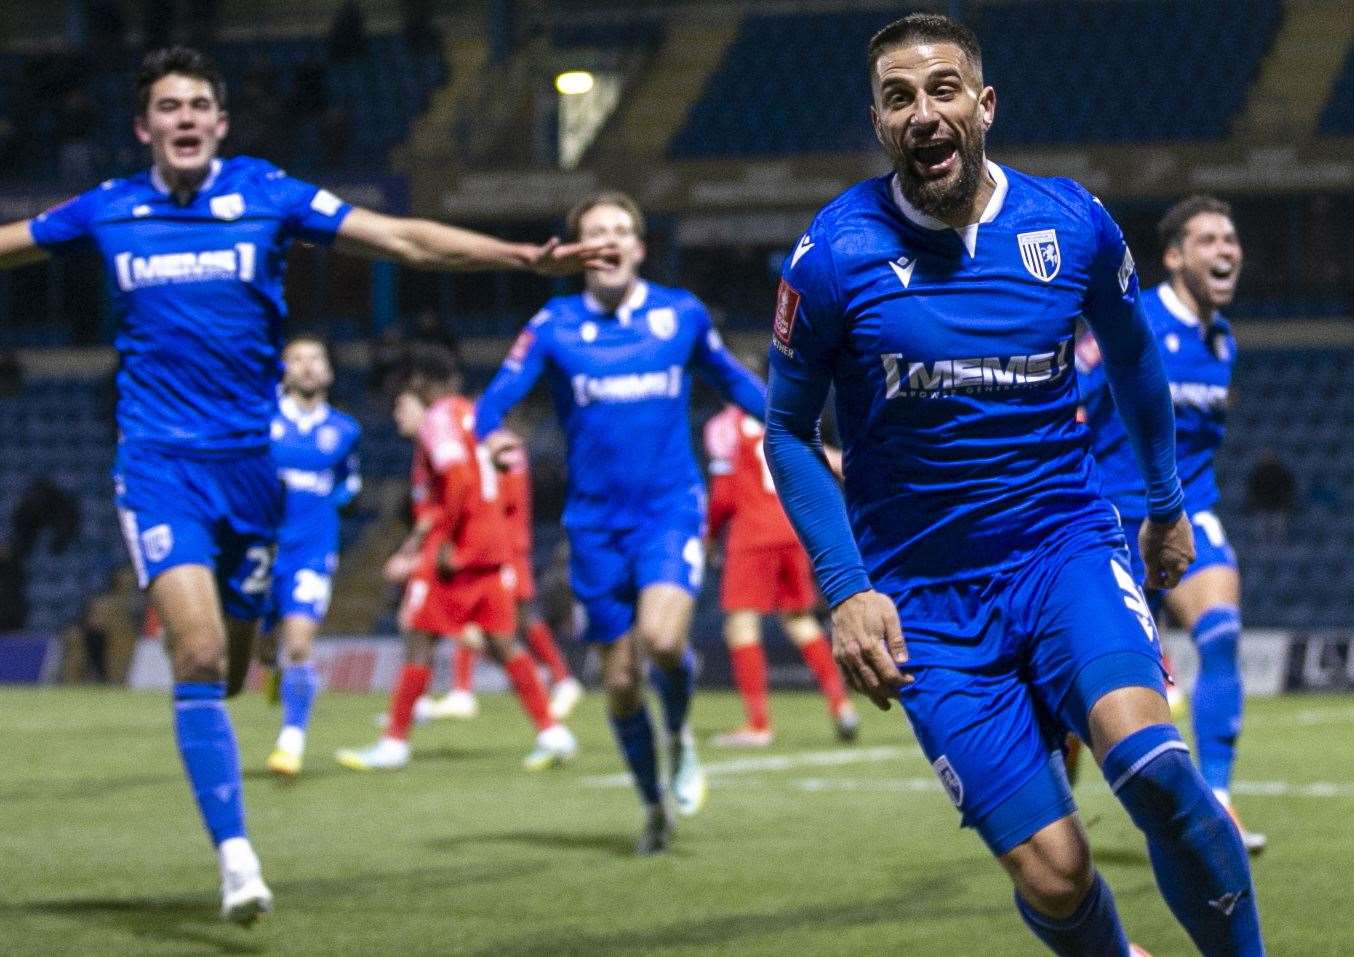 Gillingham marched on in the FA Cup after a 3-2 Second Round replay win over Dagenham